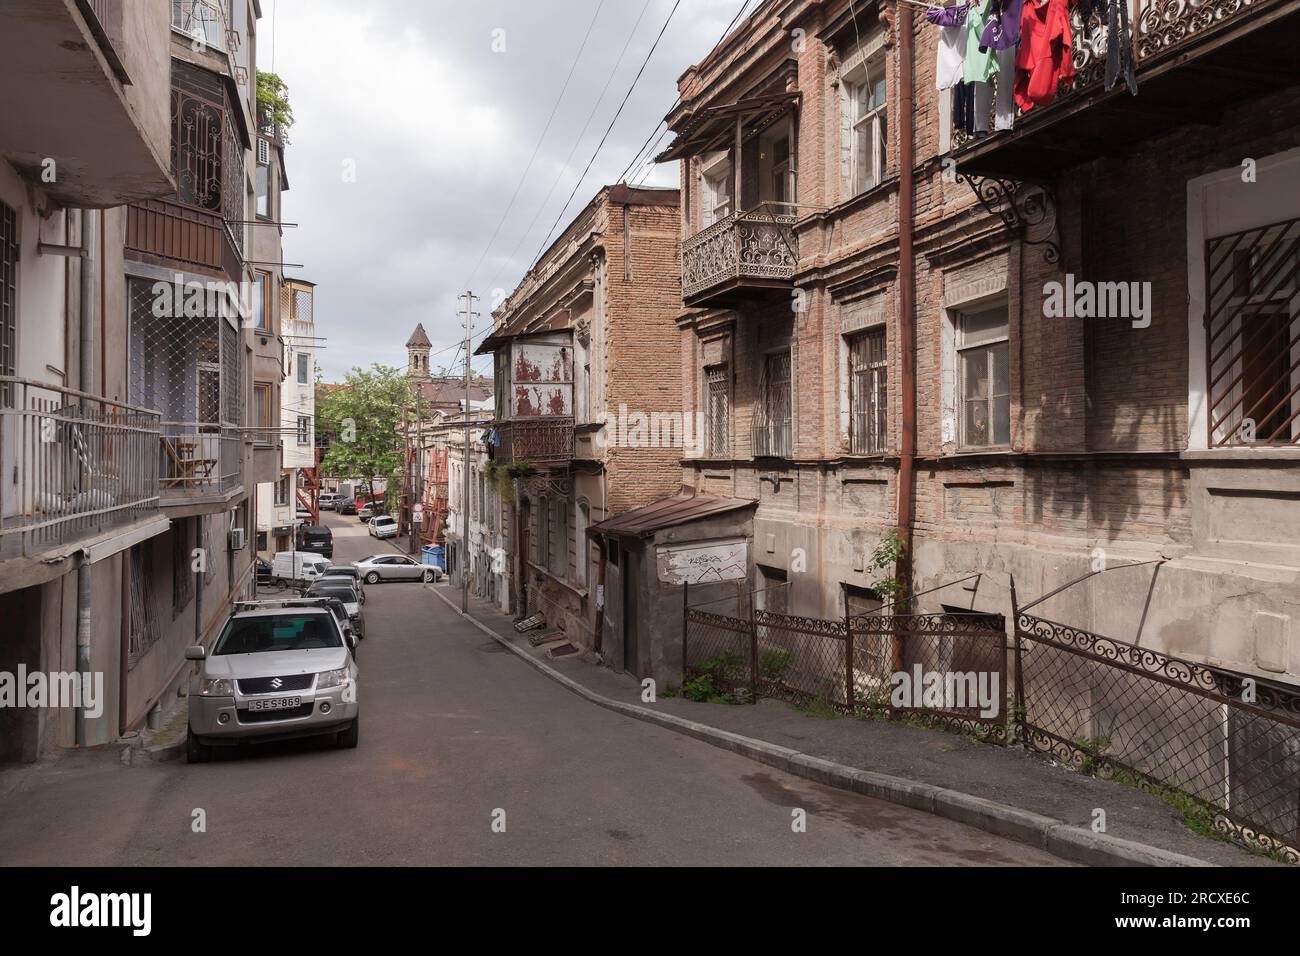 Tbilisi, Georgia - May 3, 2019: Old Tbilisi street view with parked cars and walking people Stock Photo